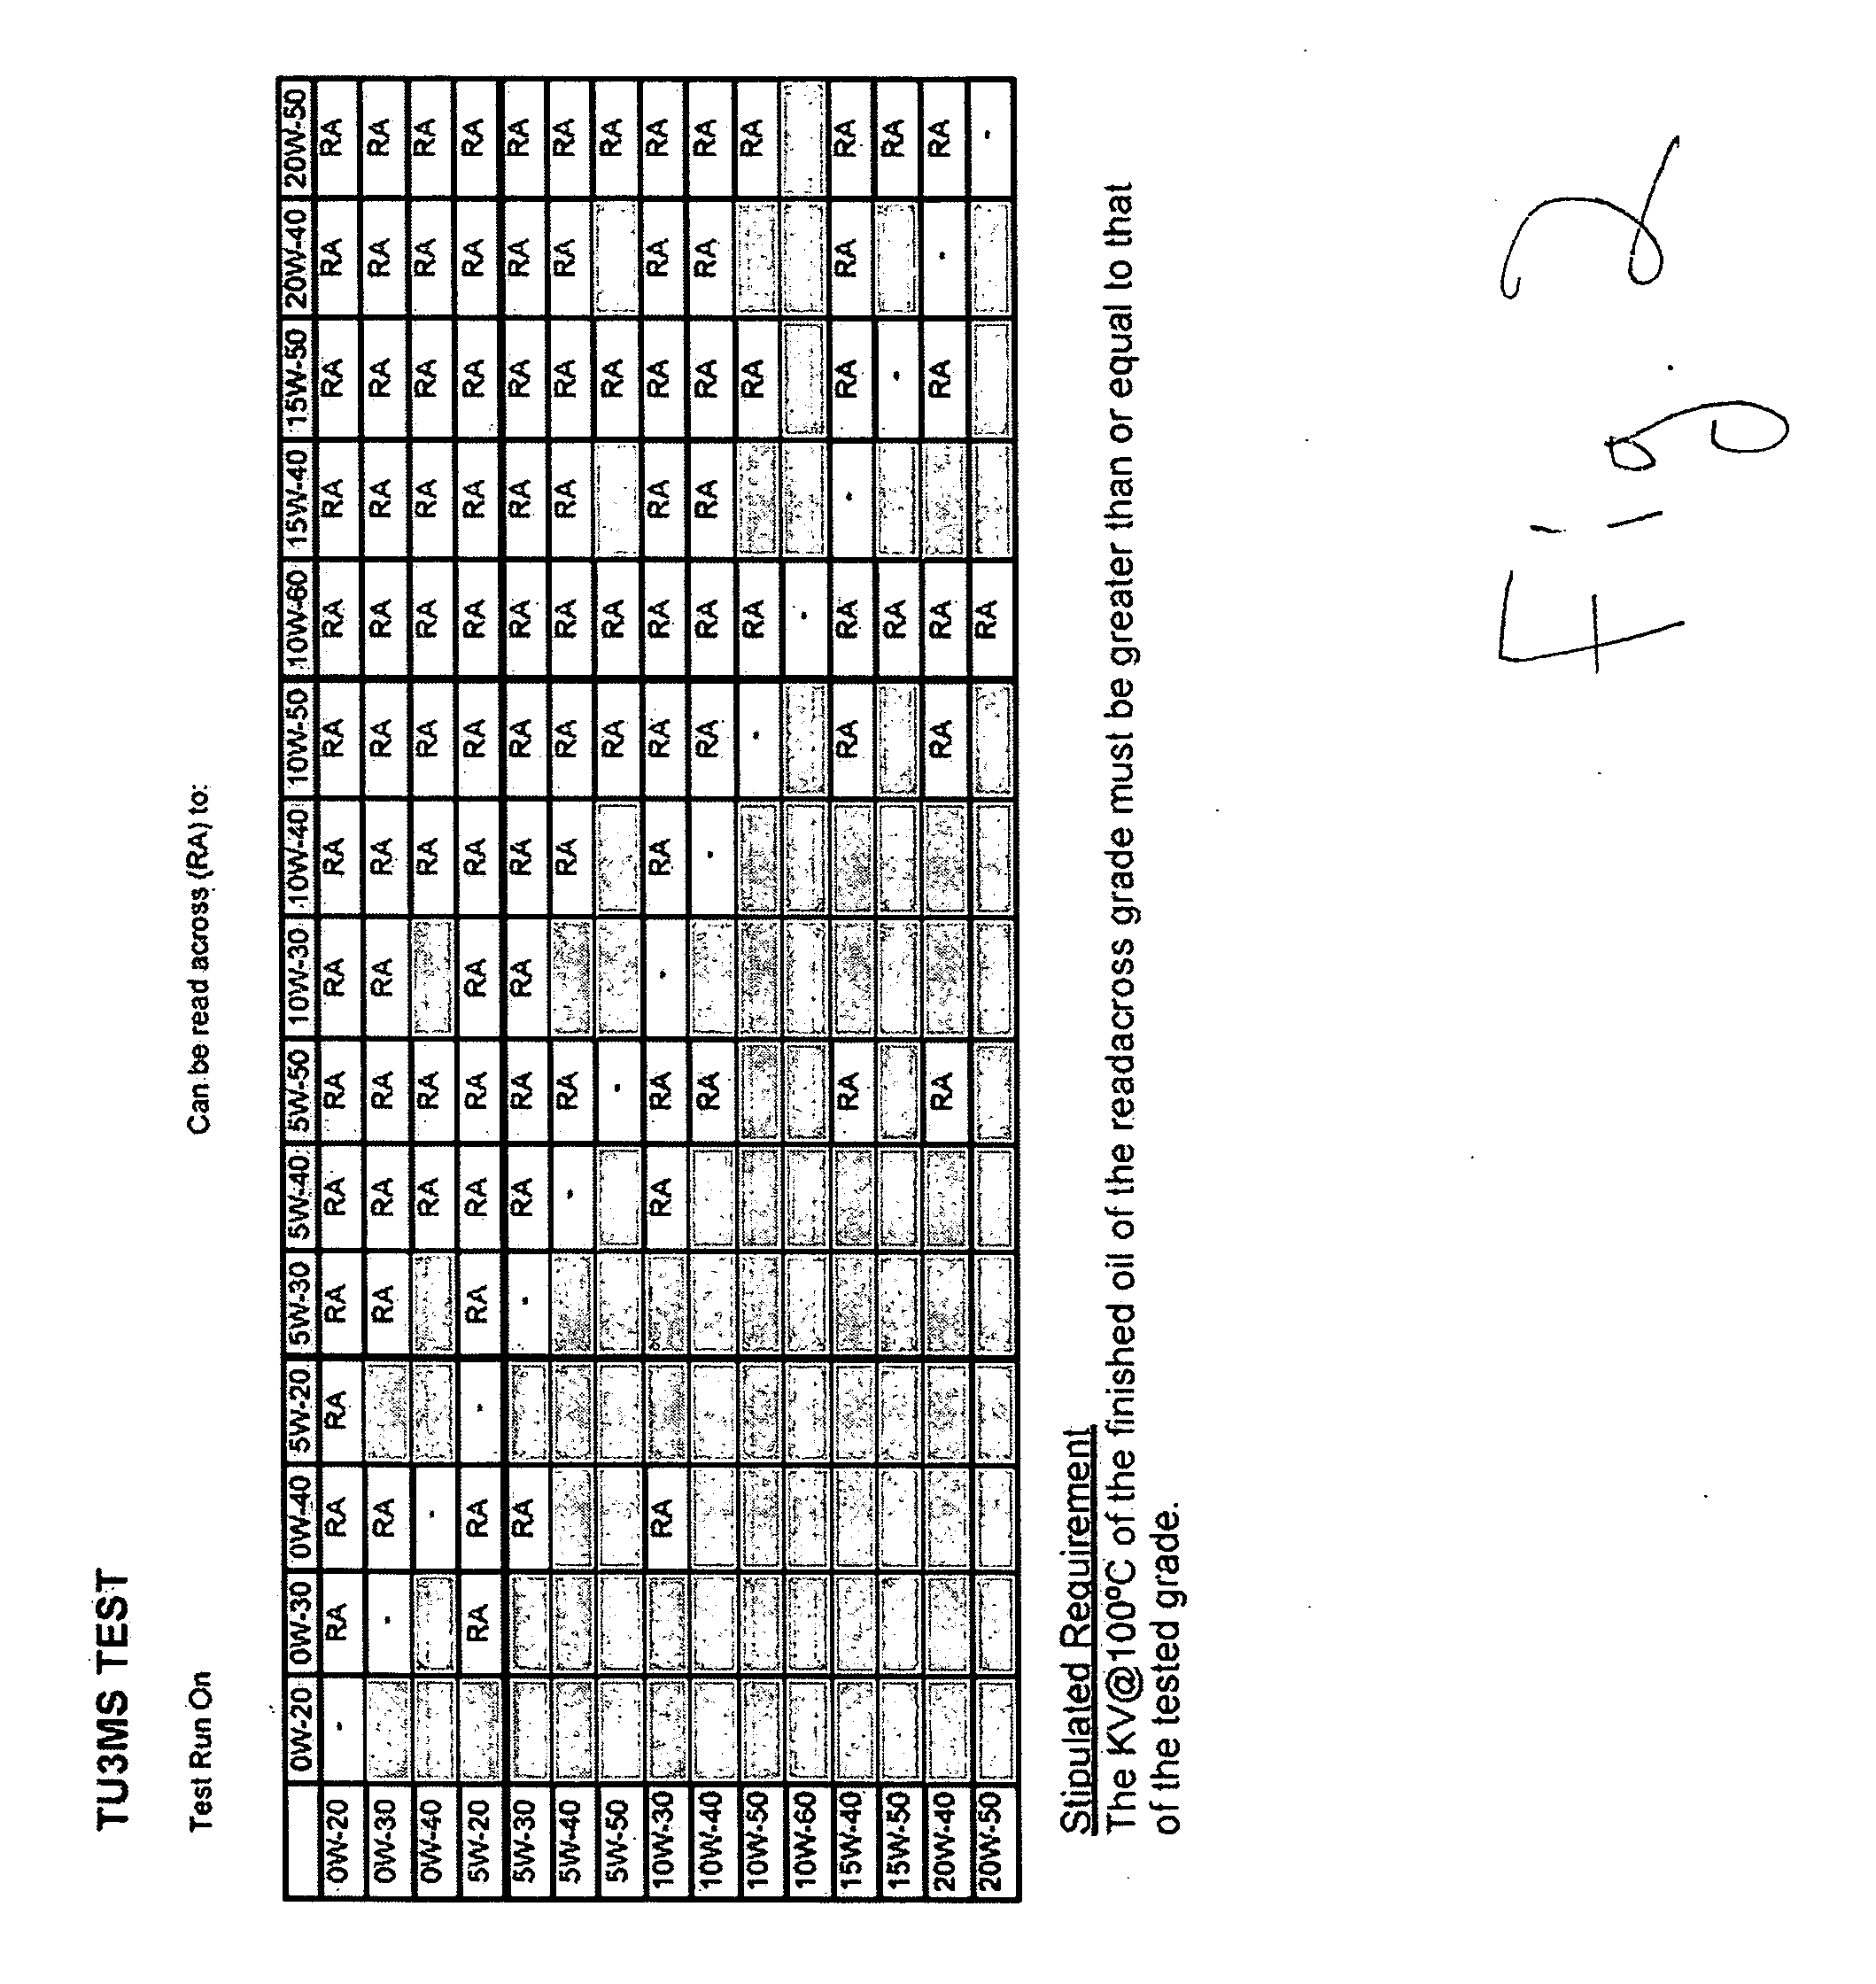 System and method for simulating lubricating oil testing